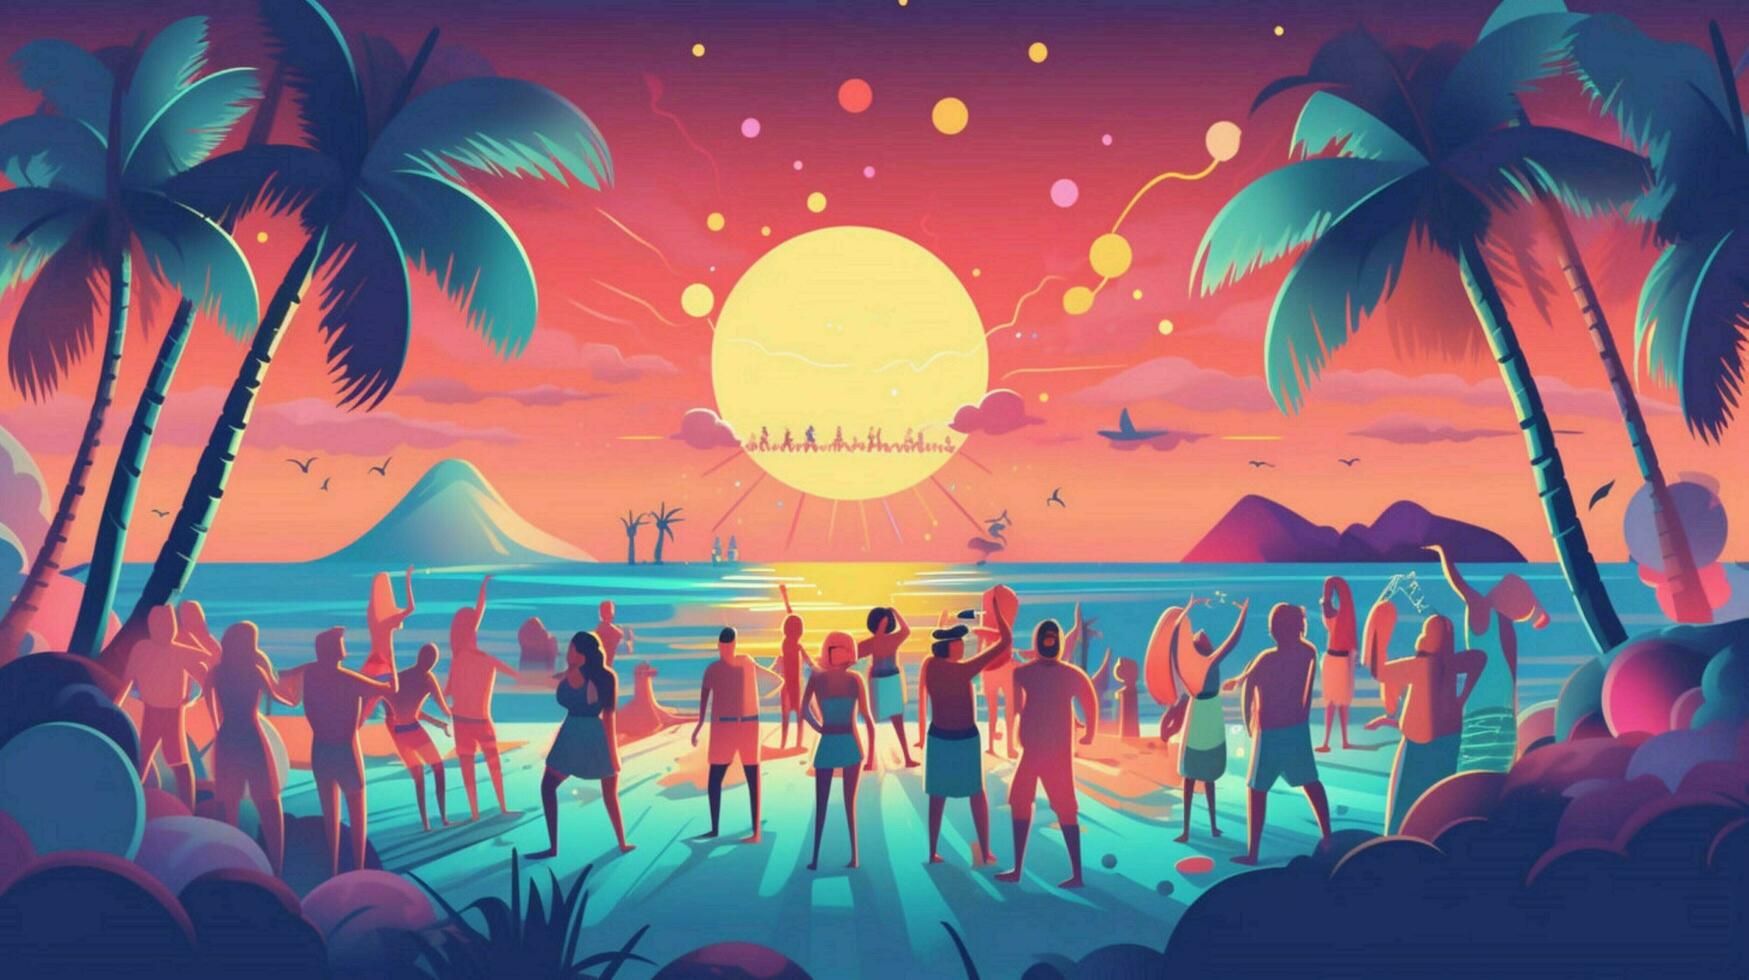 the image shows a night beach party with music photo